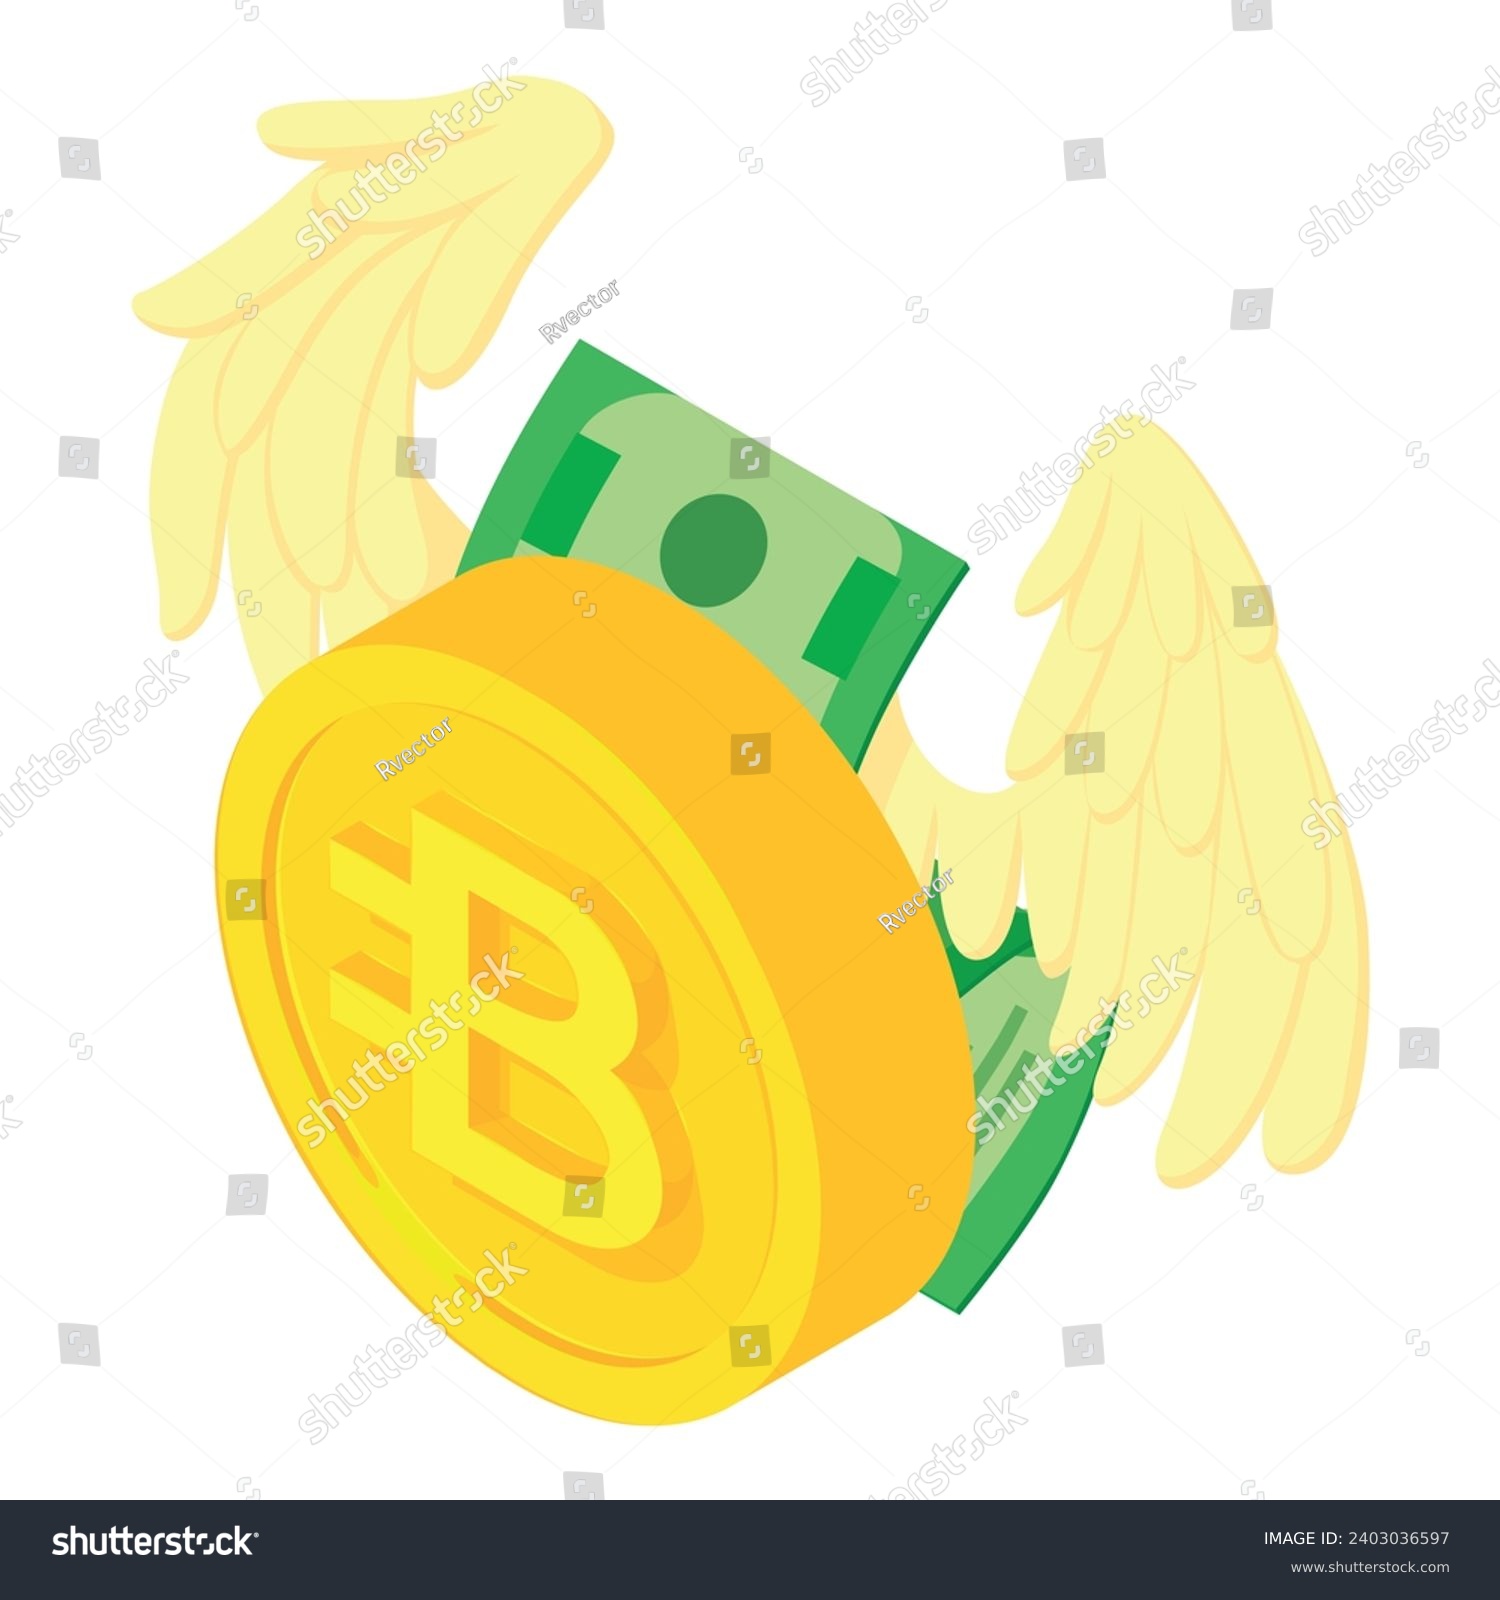 SVG of Bytecoin cryptocurrency icon isometric vector. Bytecoin coin and flying dollar. Digital money, cryptocurrency concept svg